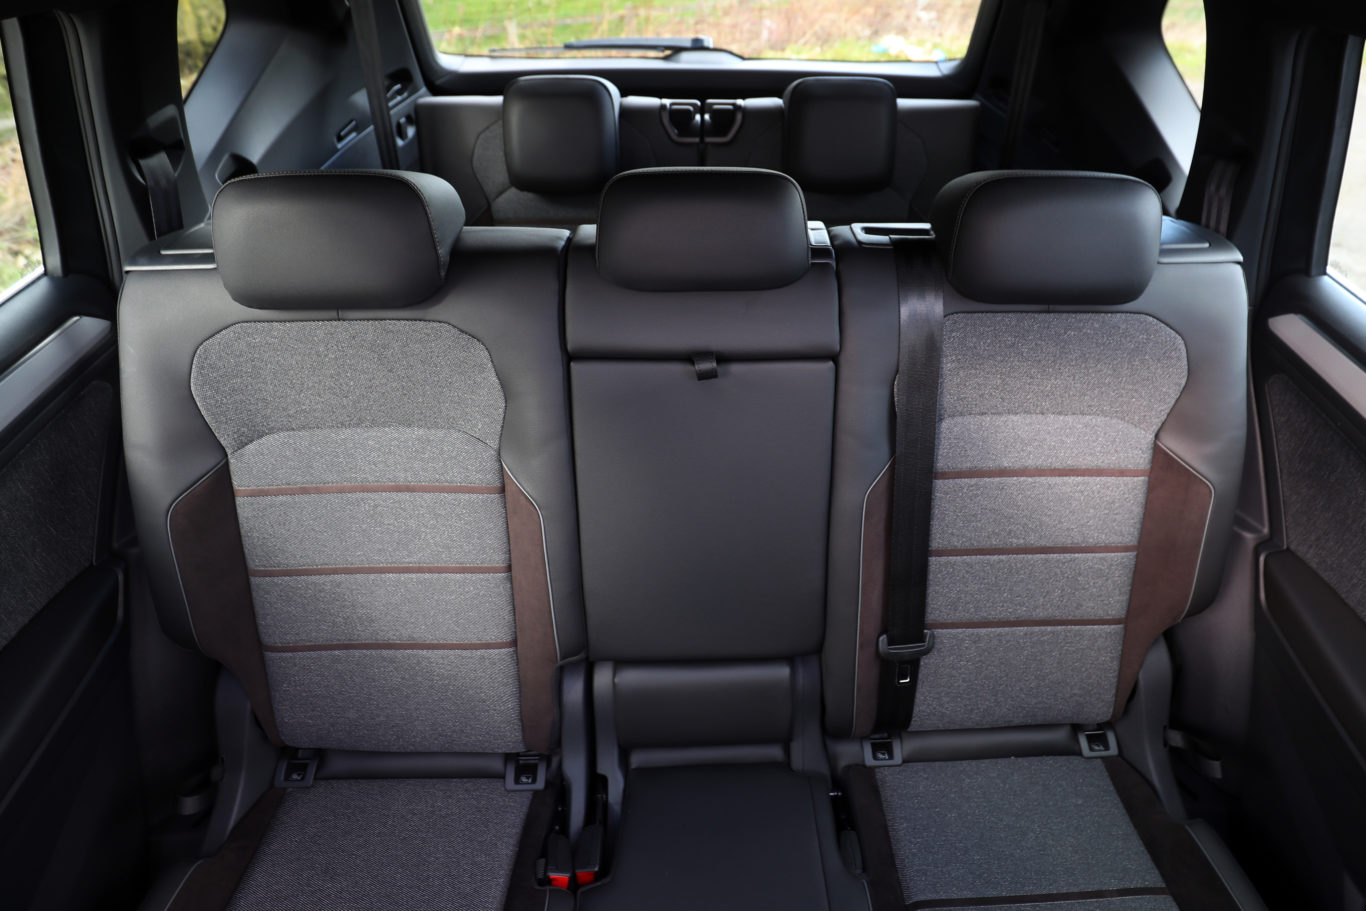 The Tarraco offers three rows of seating